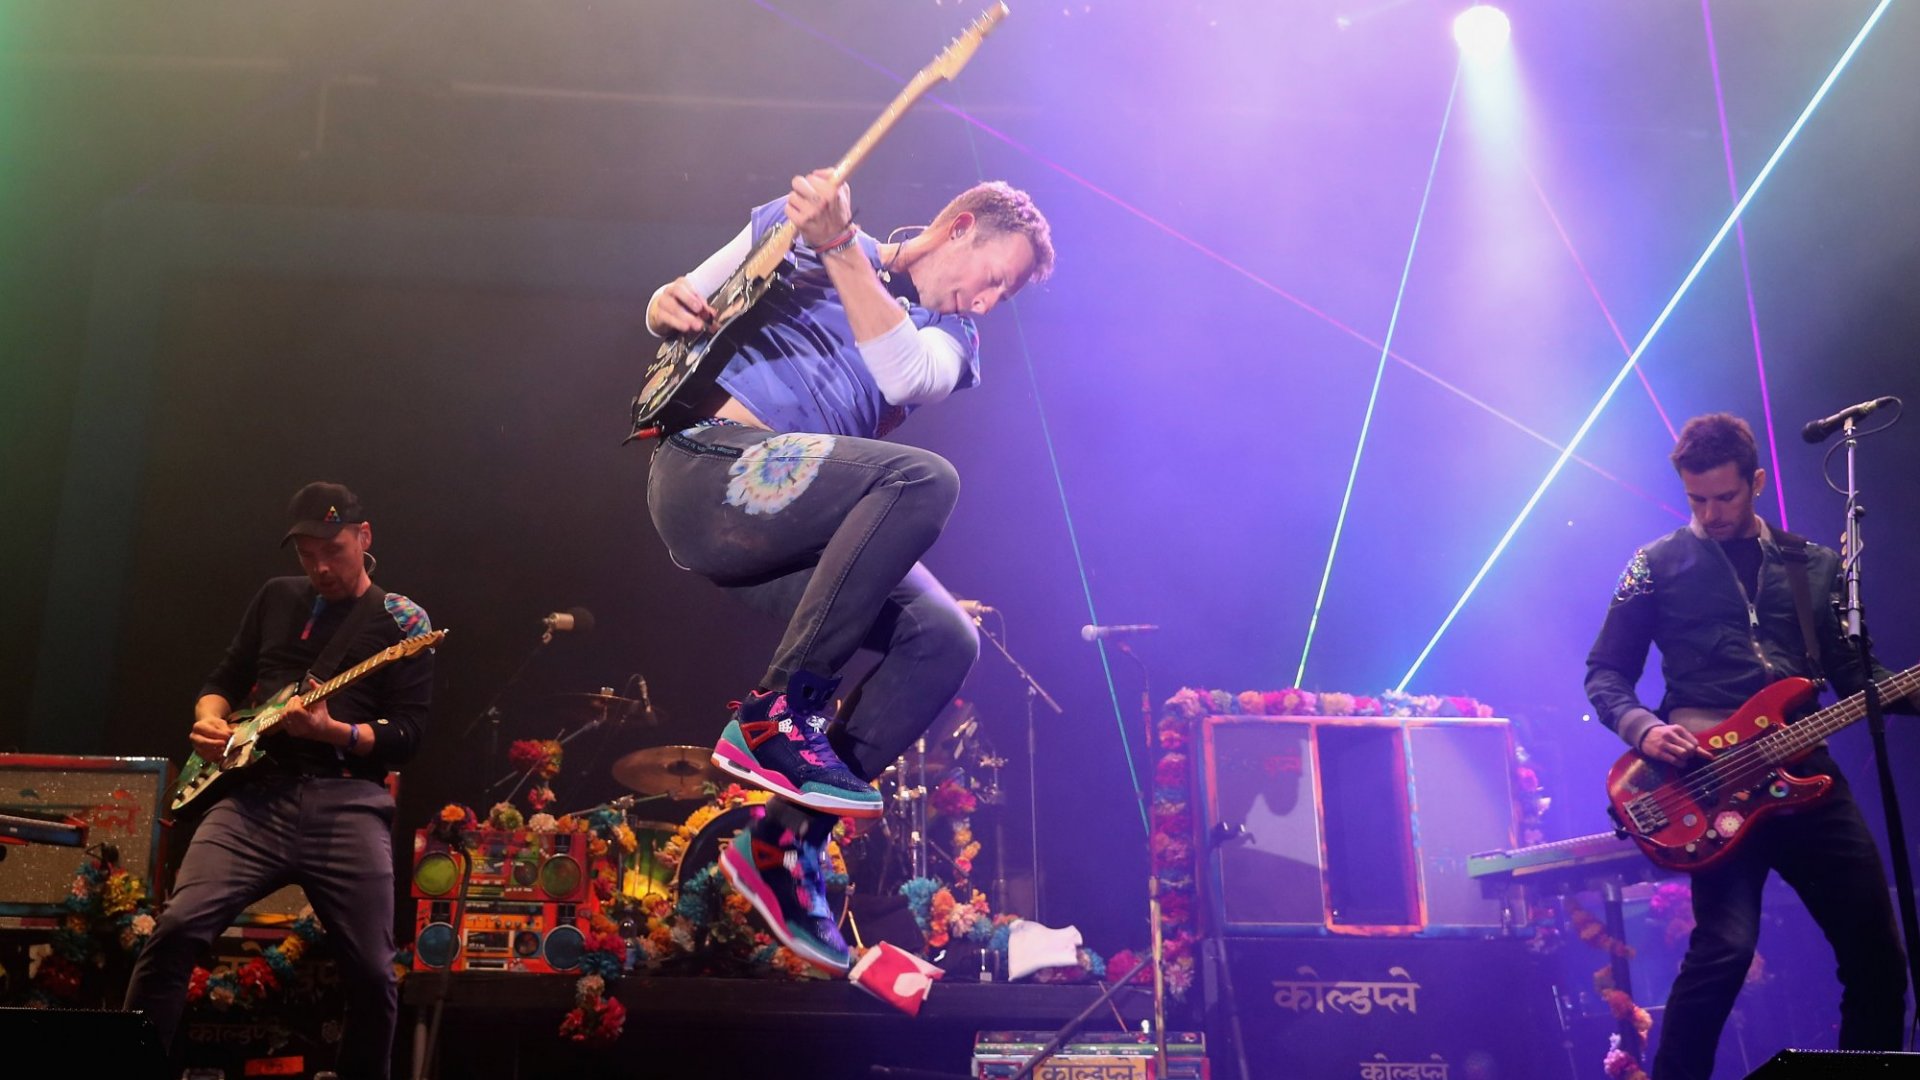 The members of Coldplay perform for their A Head Full of Dreams album.  Chris Martin is jumping while playing guitar.